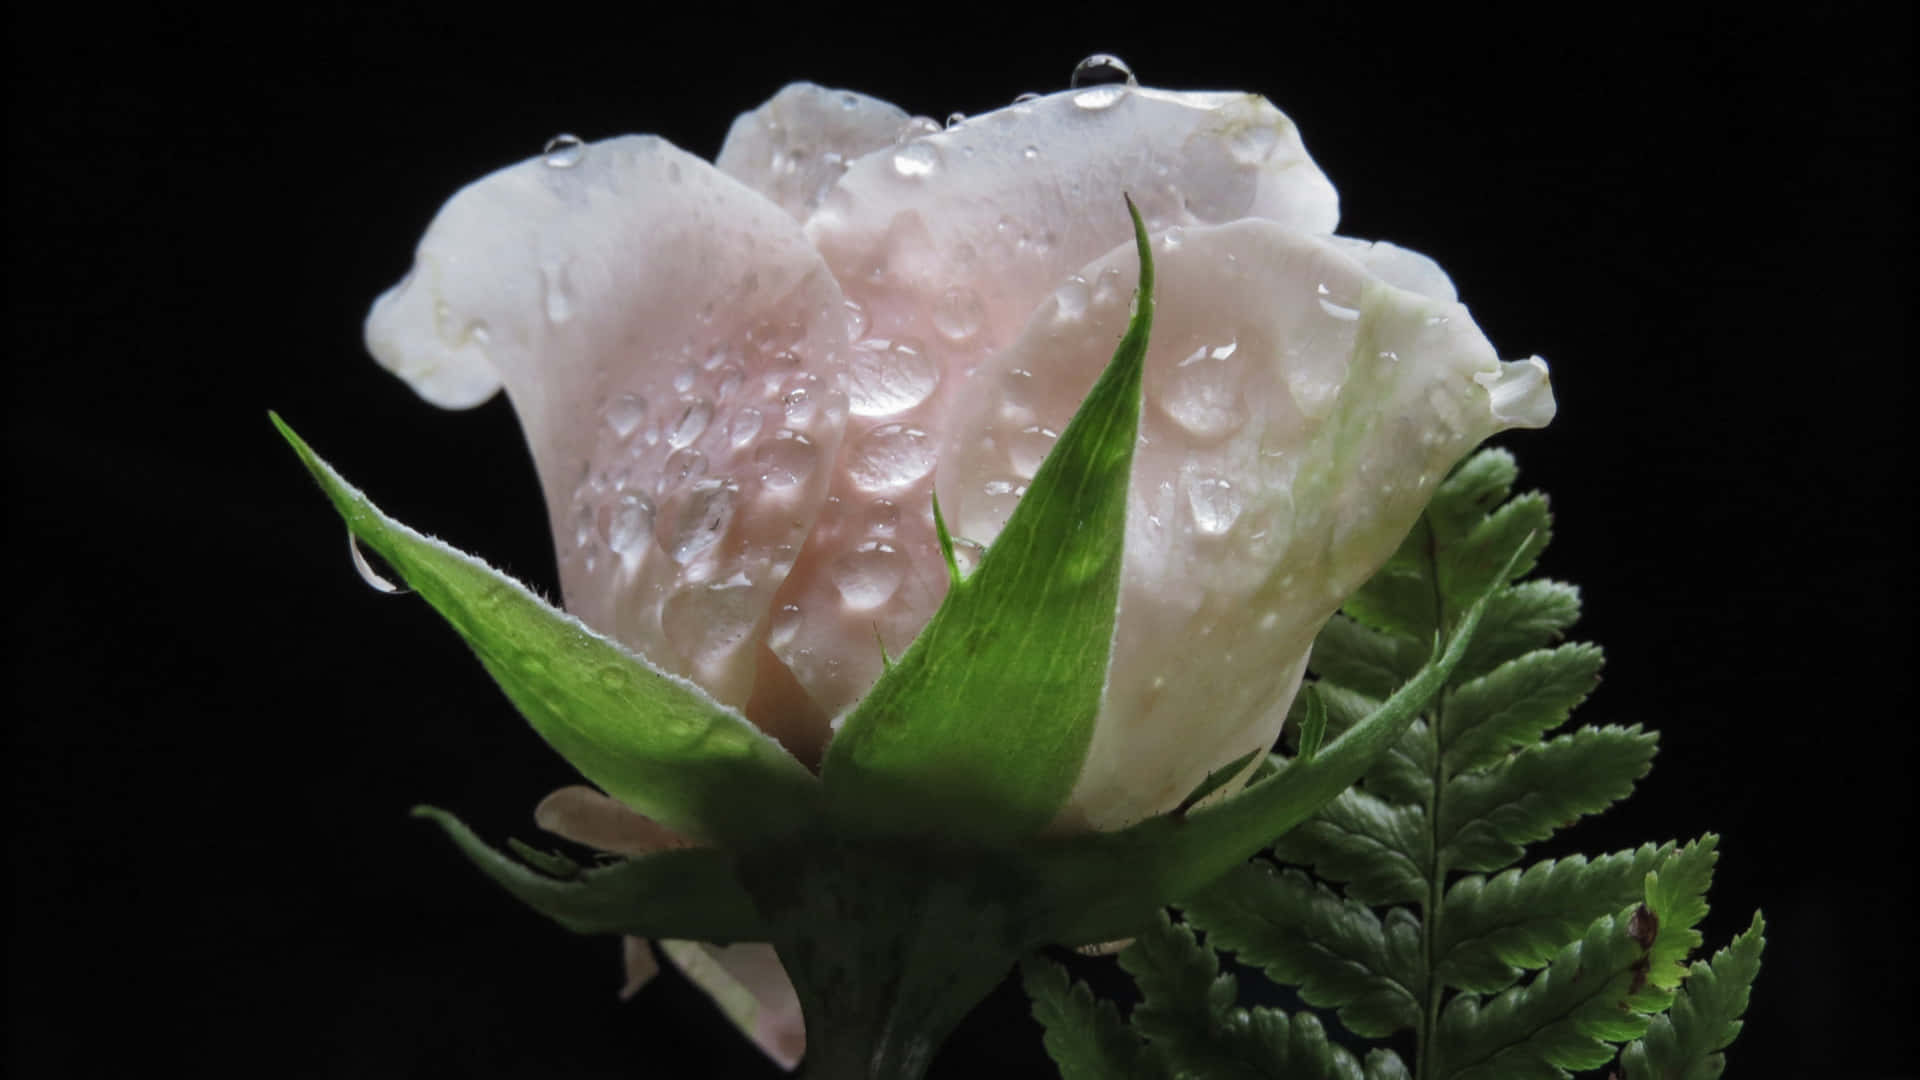 1440p Single White Rose With Droplets Background